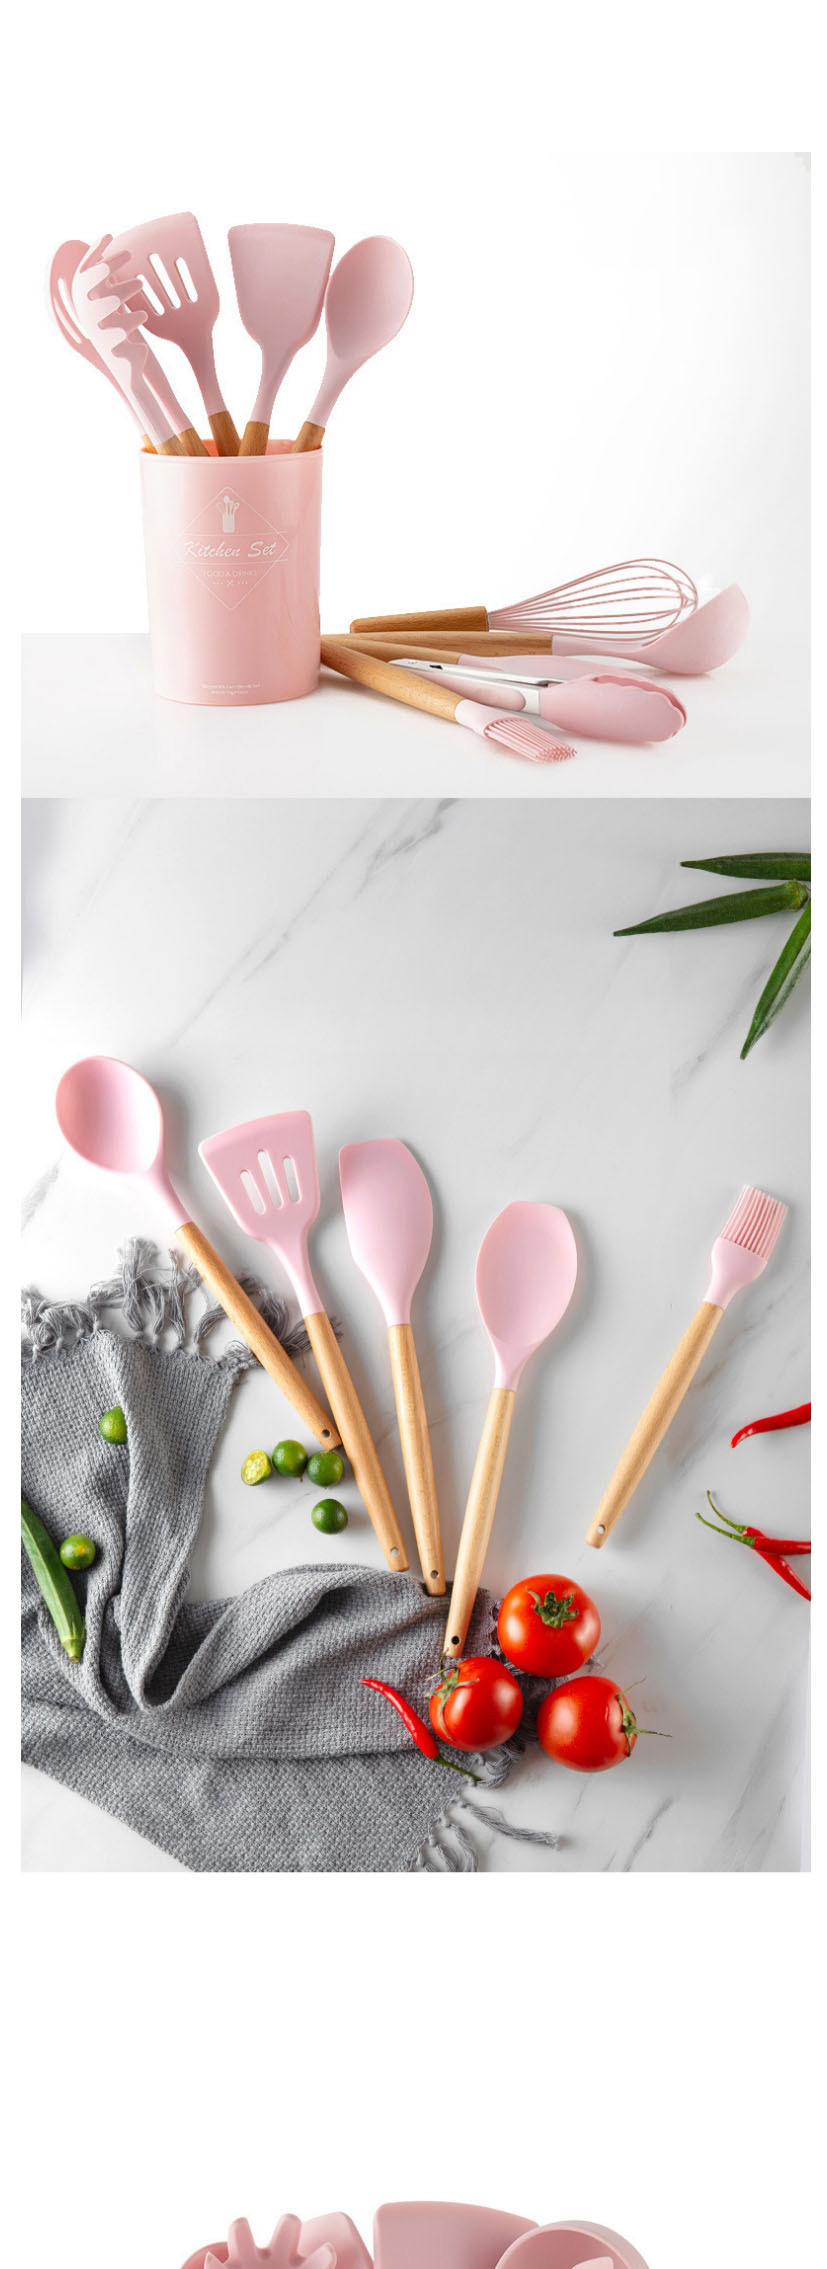 Fashion Pink Paws Pink Solid Wood Handle With Bucket And Silica Gel Kitchenware,Kitchen